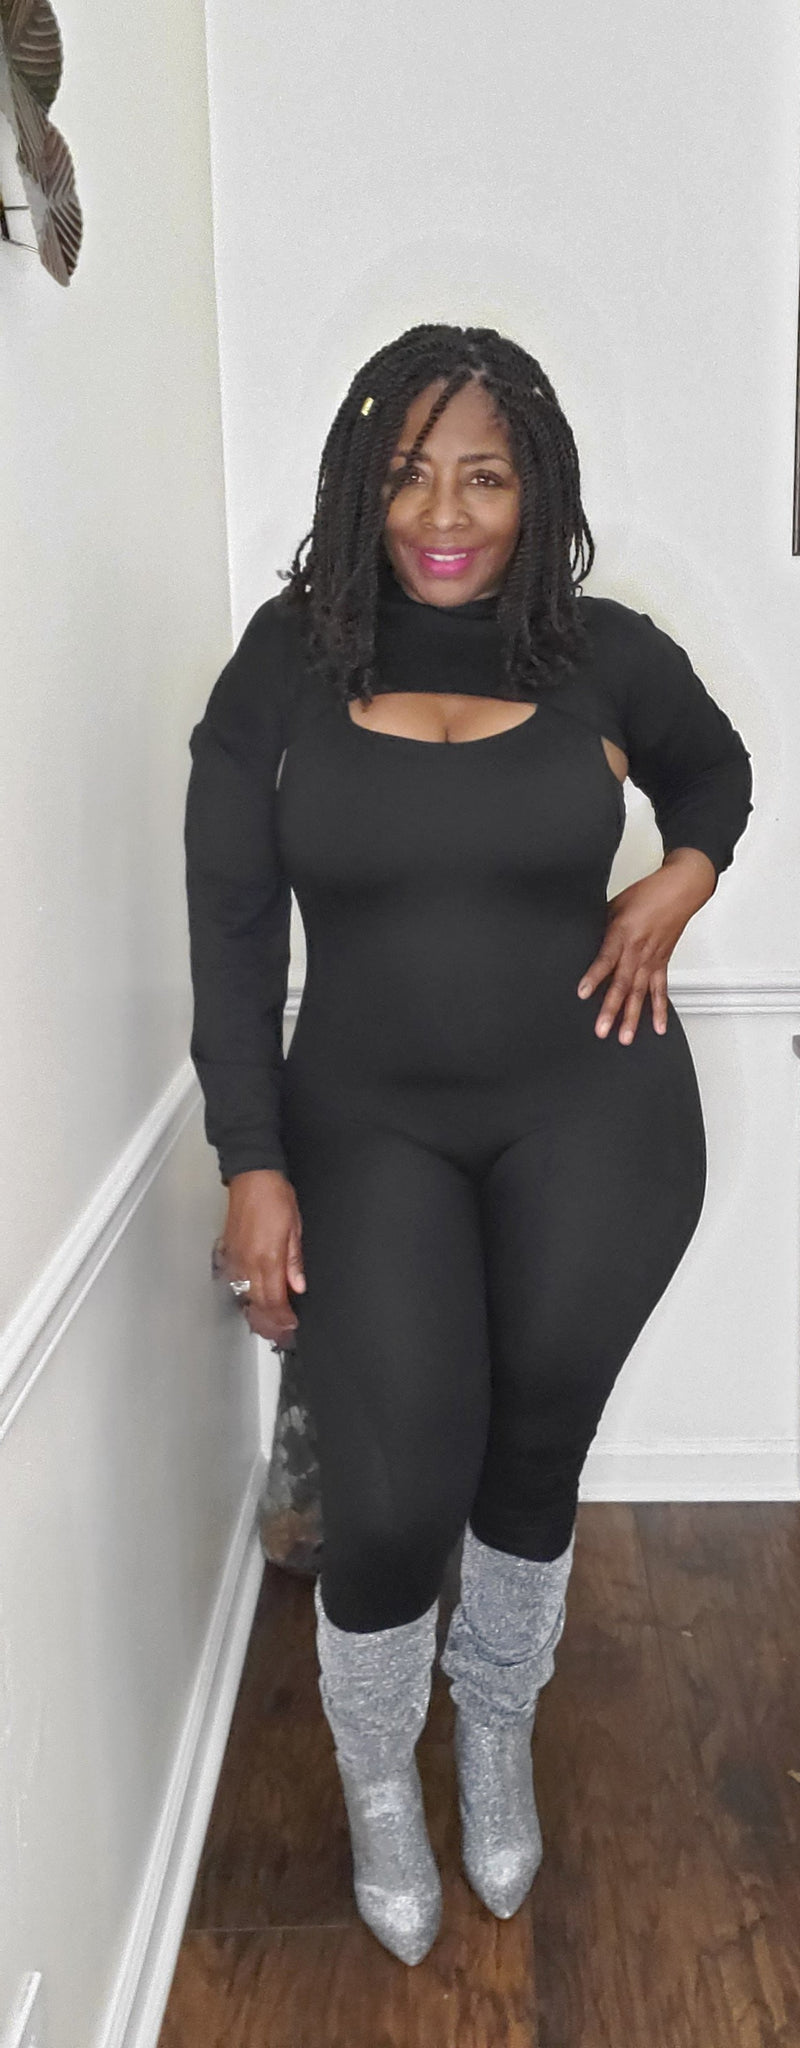 All in Body Suit